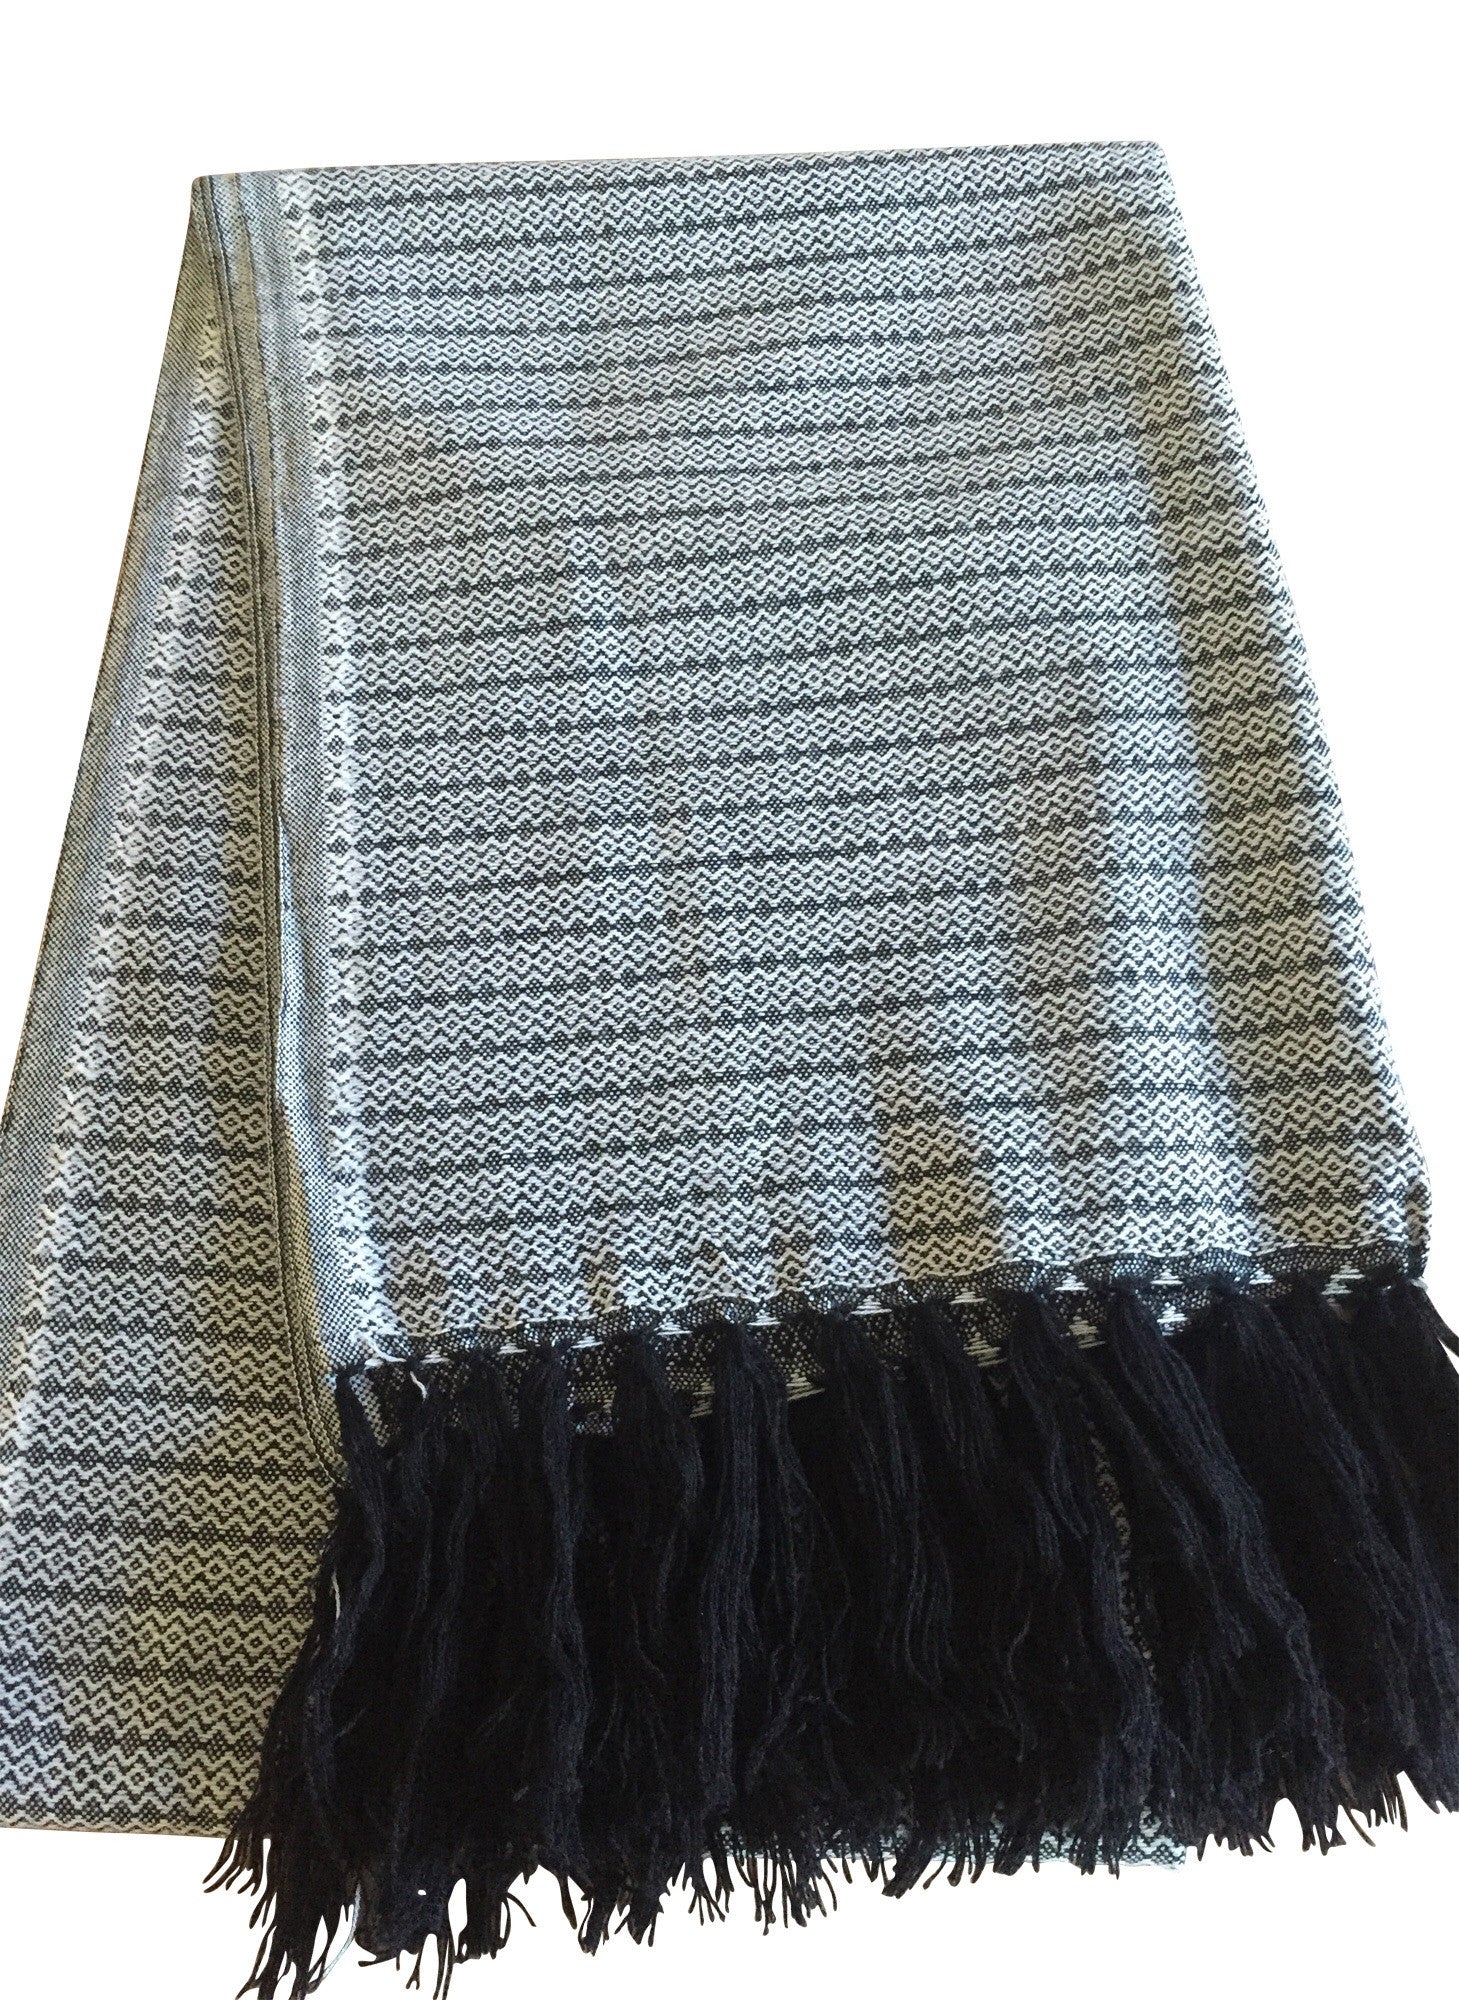 Mexican Rebozo Handwoven black and white with Fringes - MesaChic - 1